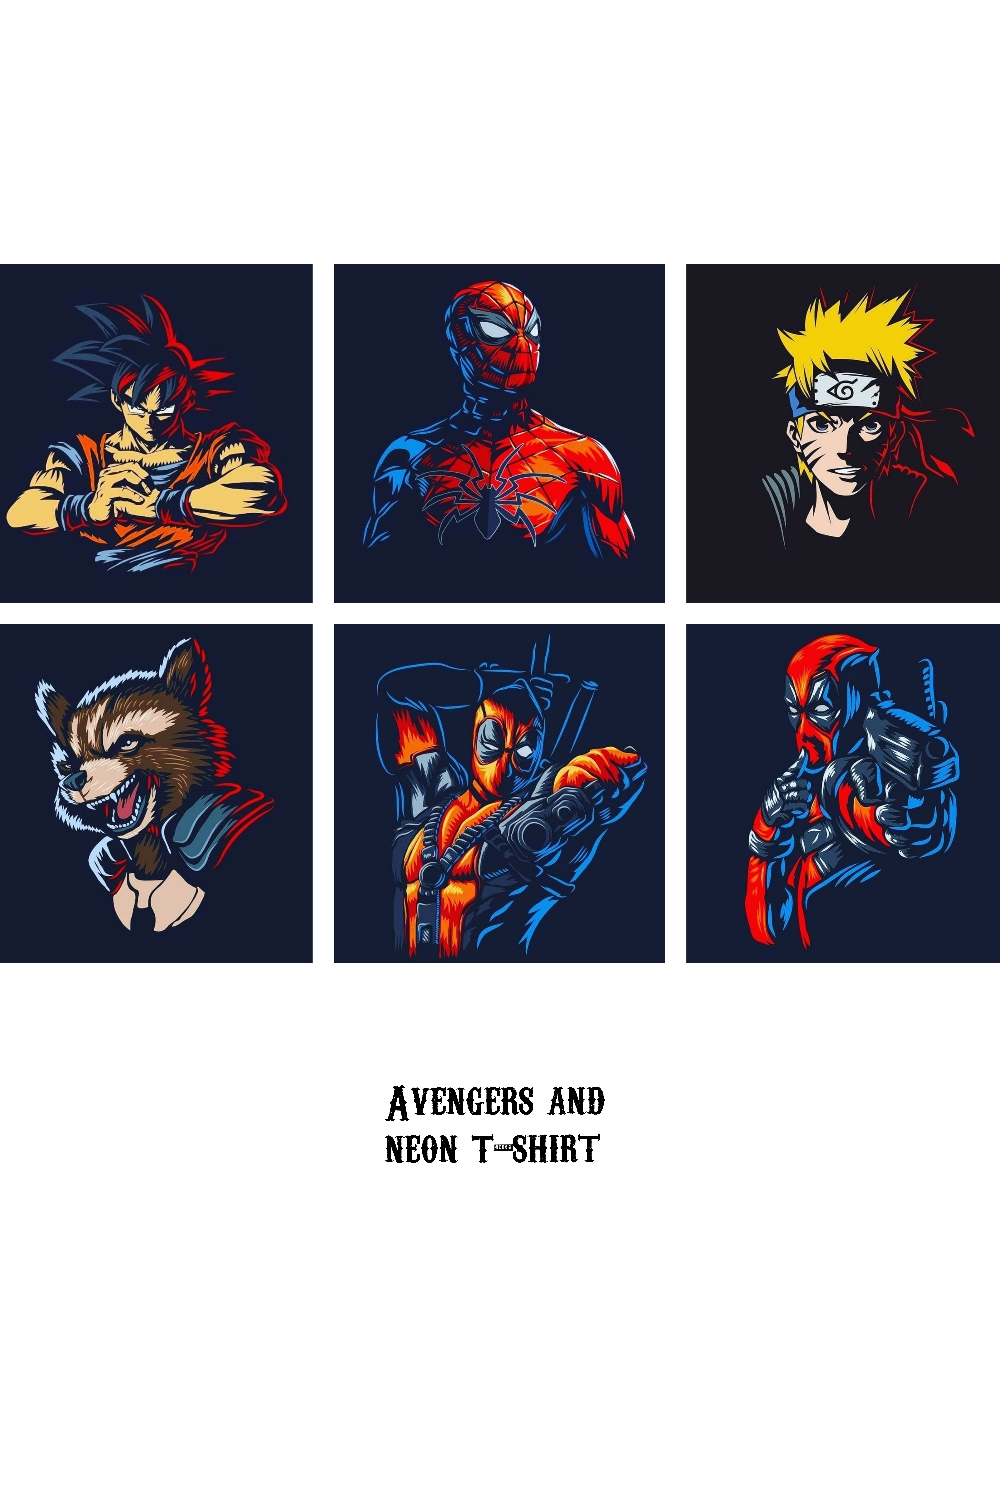 Avengers and neon t-shirt pinterest preview image.